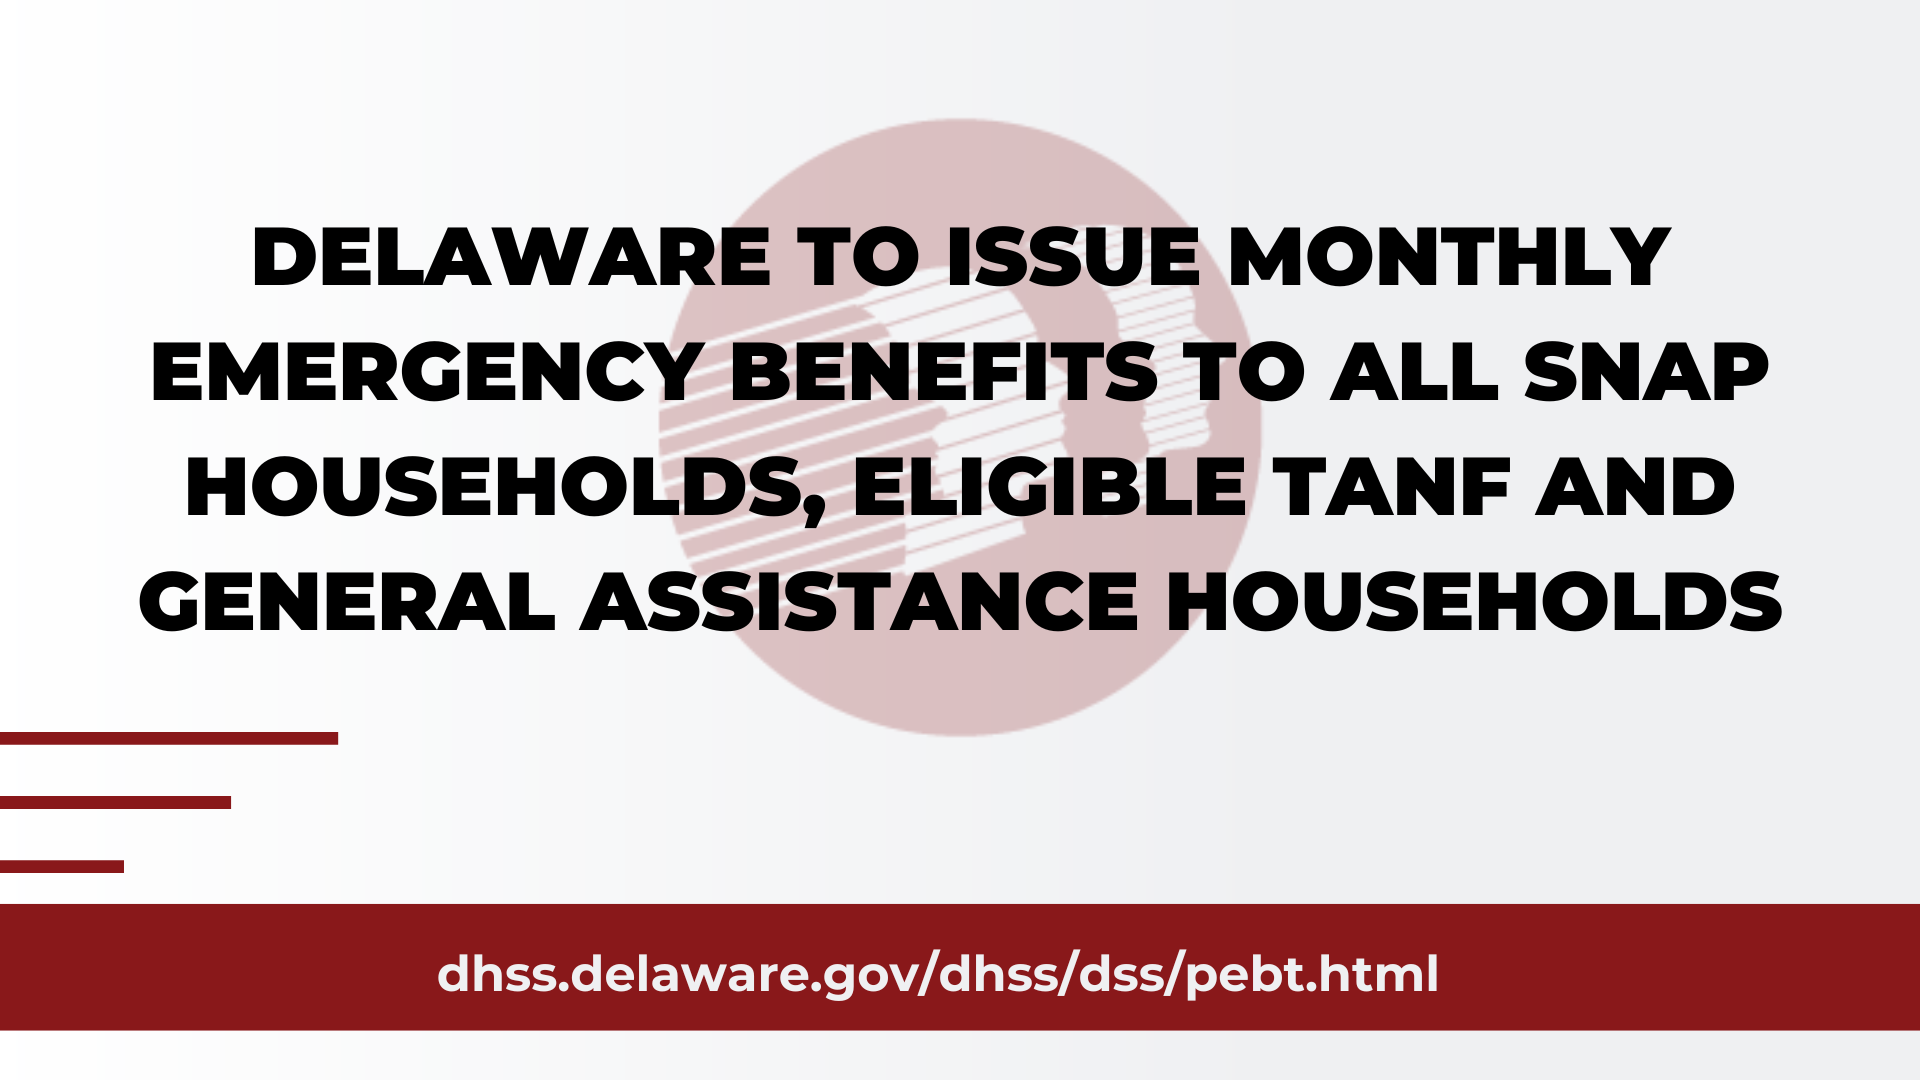 HEADLINE: Delaware Will Issue Monthly Emergency Benefits on Jan. 26 to All SNAP Households and Eligible TANF and General Assistance Households